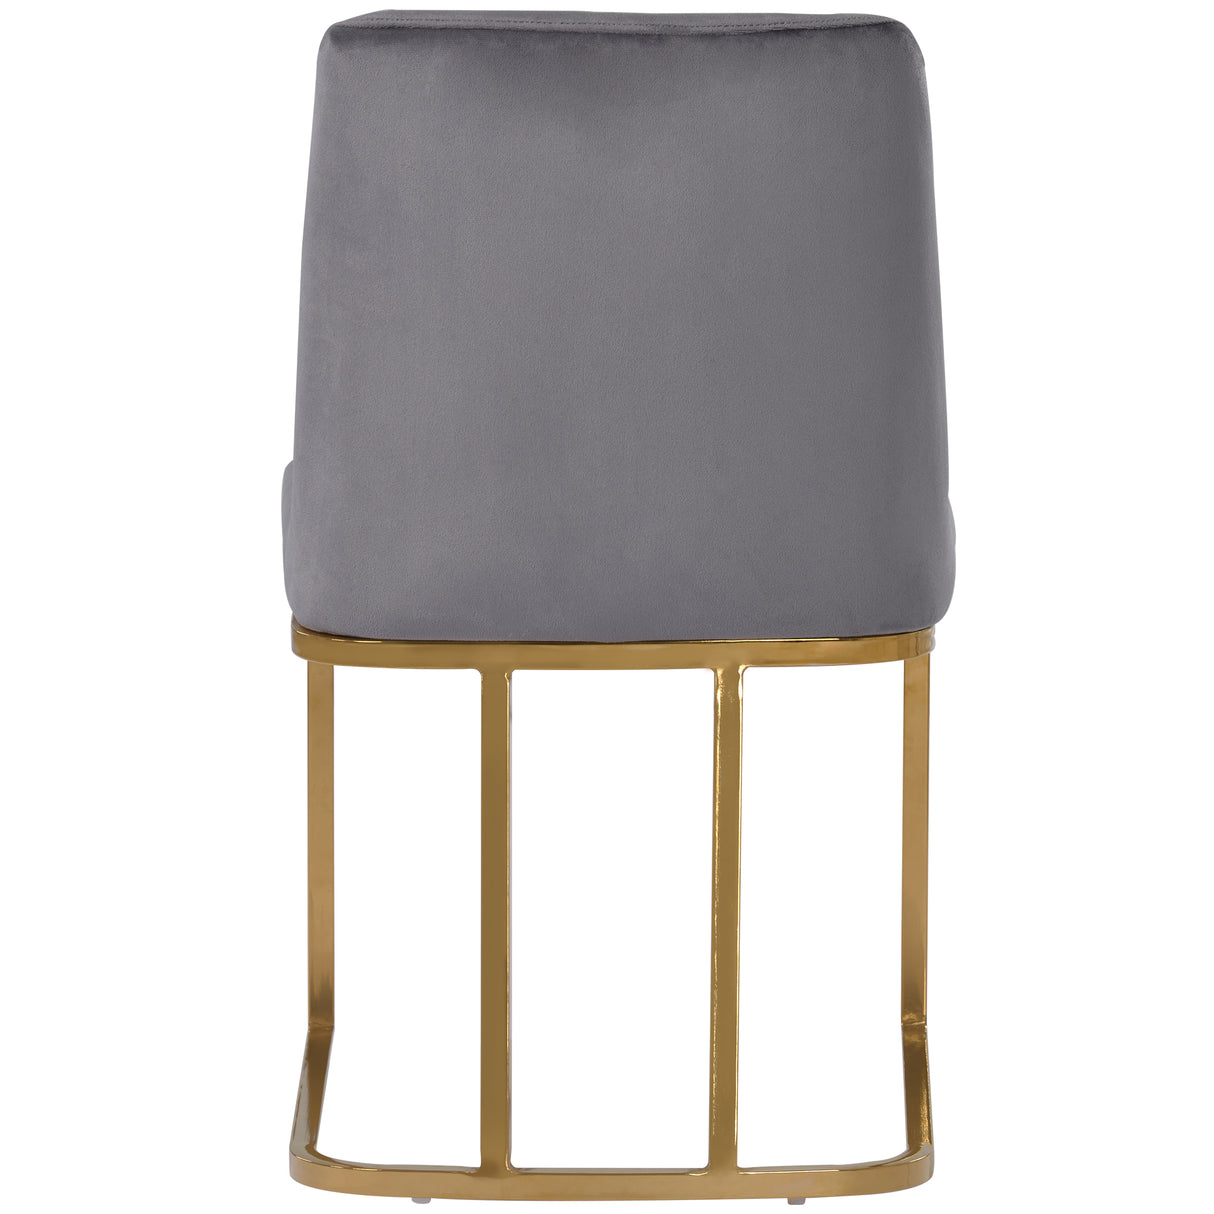 TOPMAX Modern Minimalist Gold Metal Base Upholstered Armless Velvet Dining Chairs Accent Chairs Set of 2, Gray - Home Elegance USA